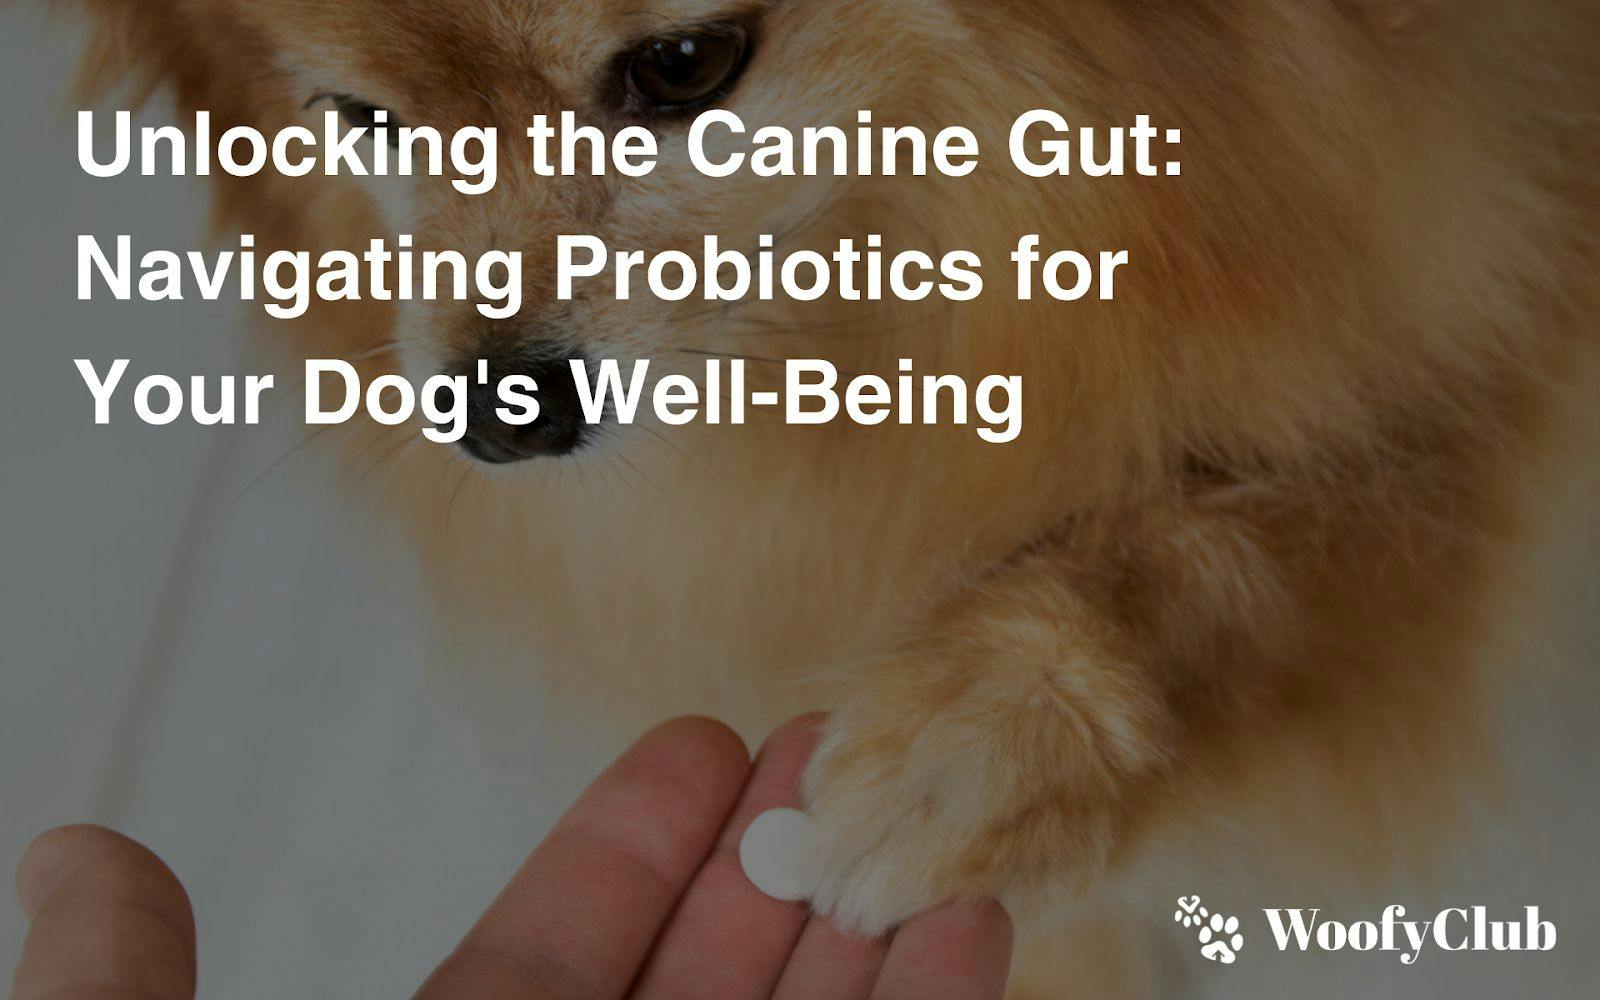 Unlocking The Canine Gut: Navigating Probiotics For Your Dog's Well-Being